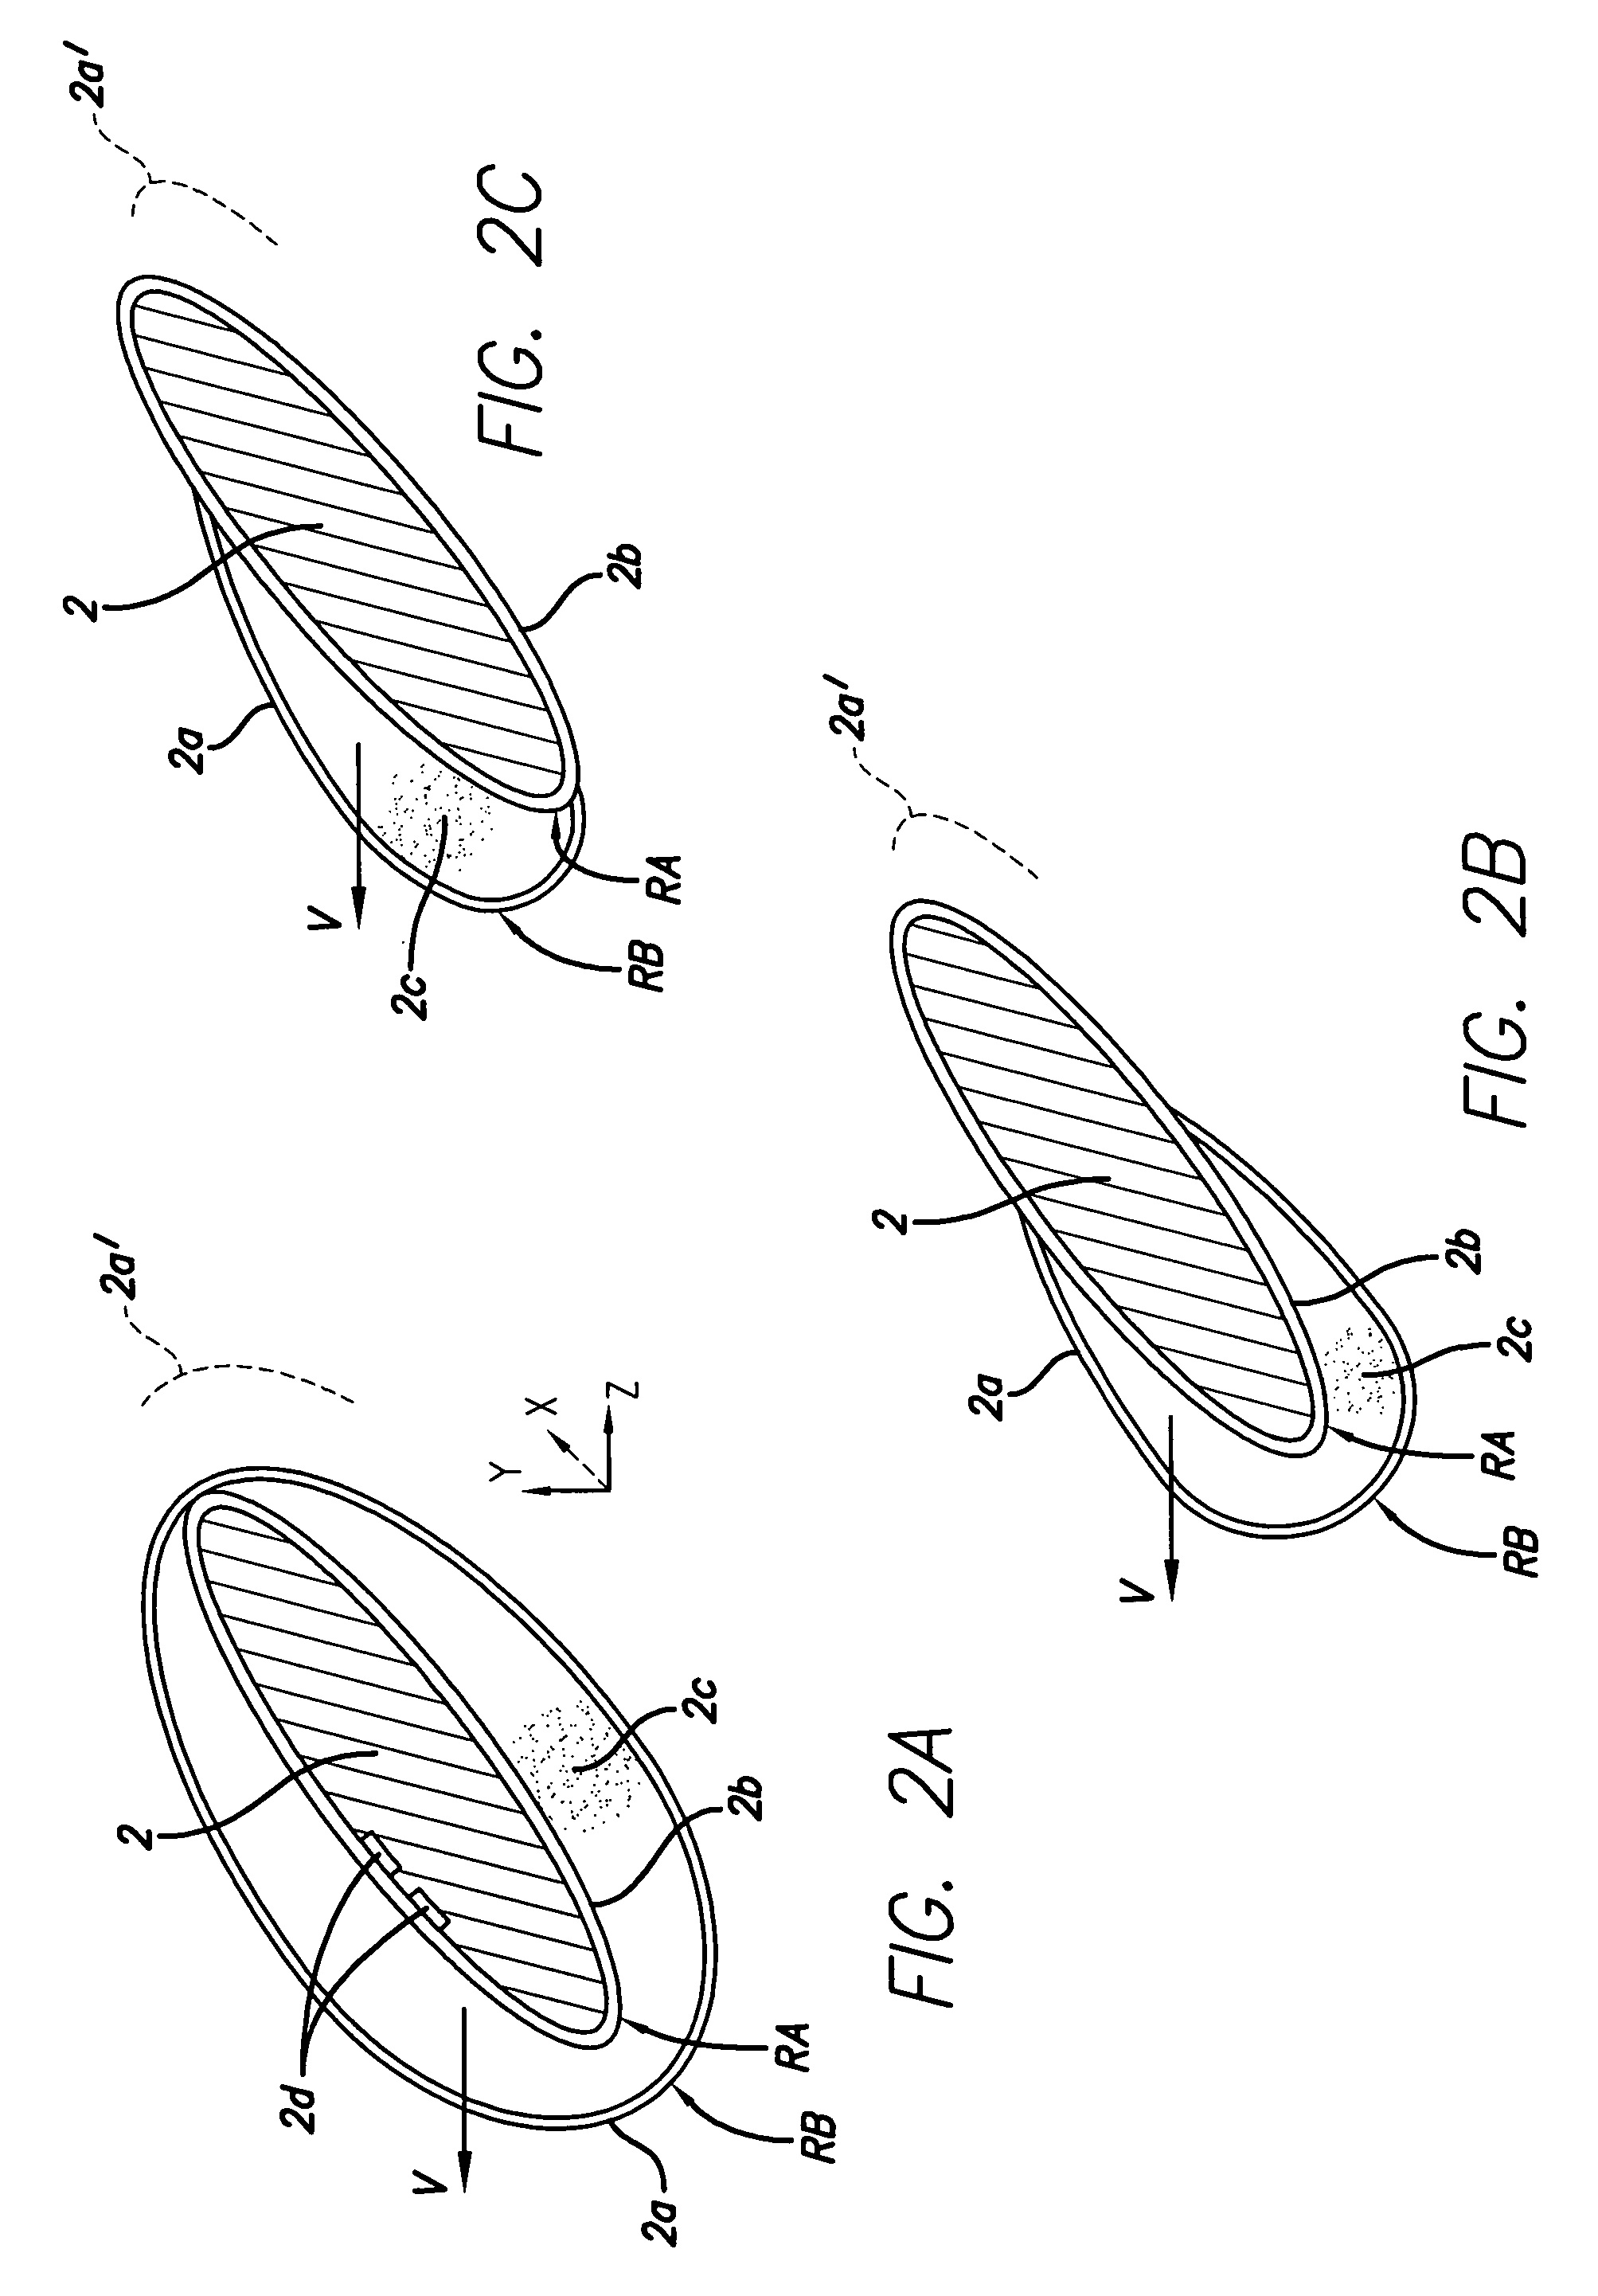 Method and apparatus for reducing bird and fish injuries and deaths at wind and water-turbine power-generation sites